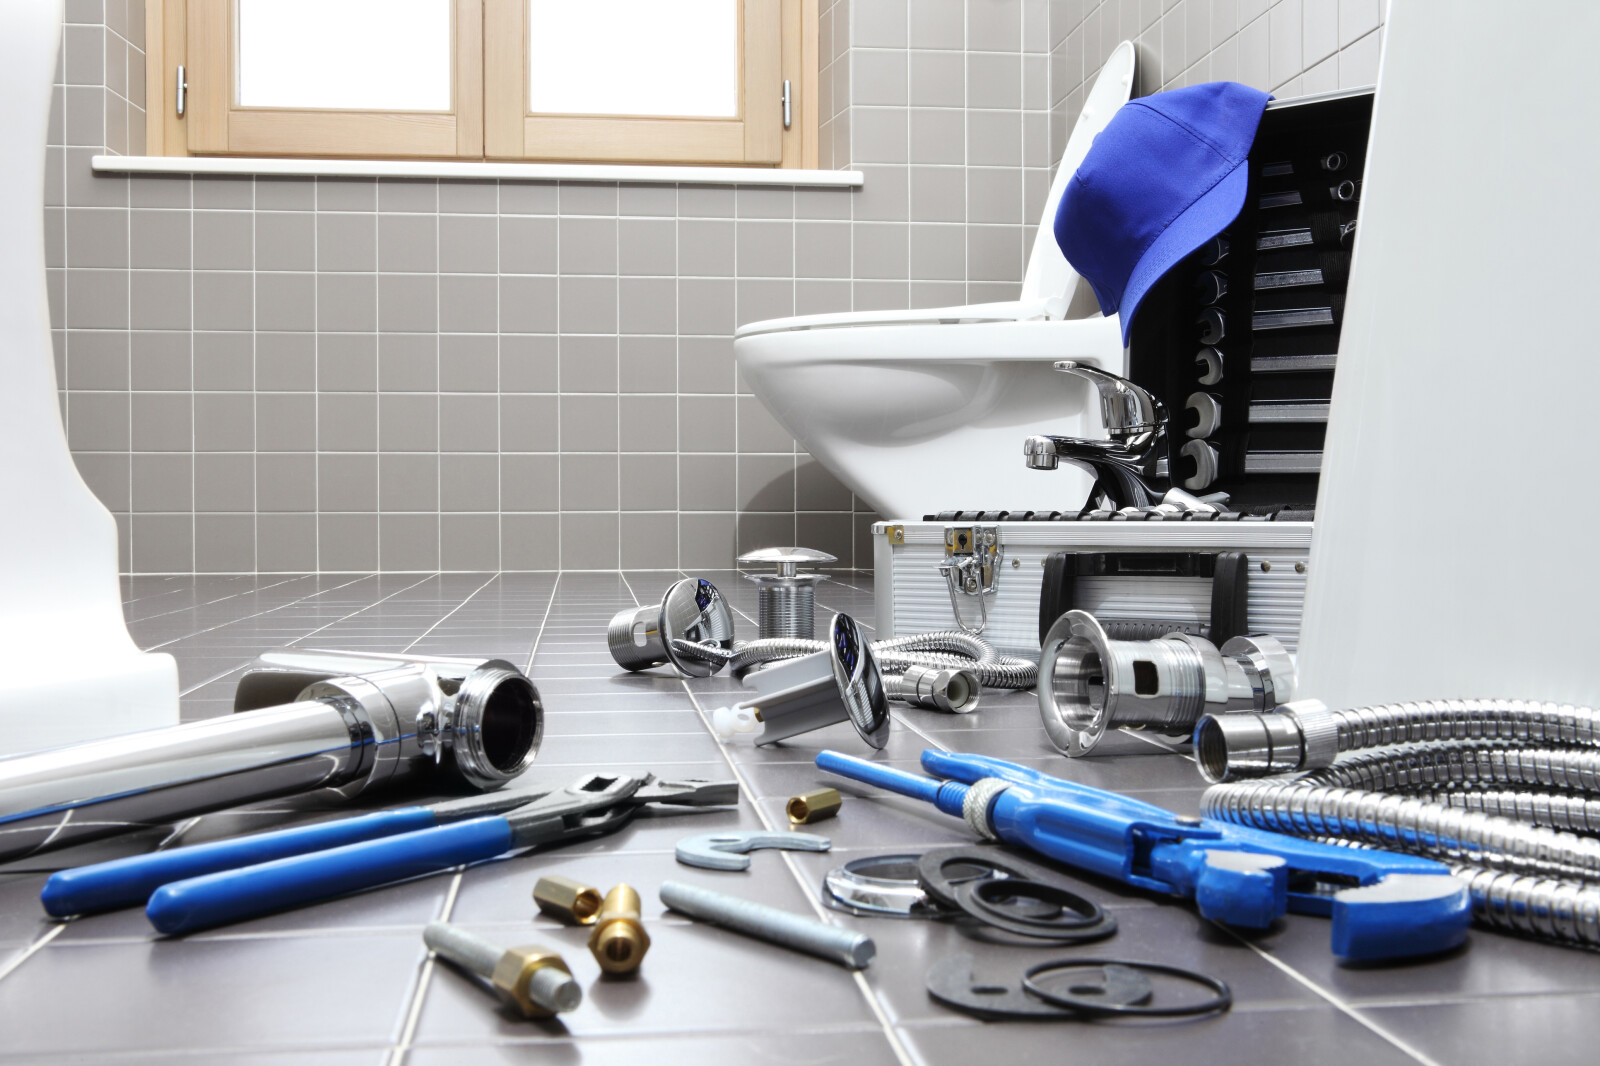 Close up image of the various tools and parts needed to install a bathroom basin and taps